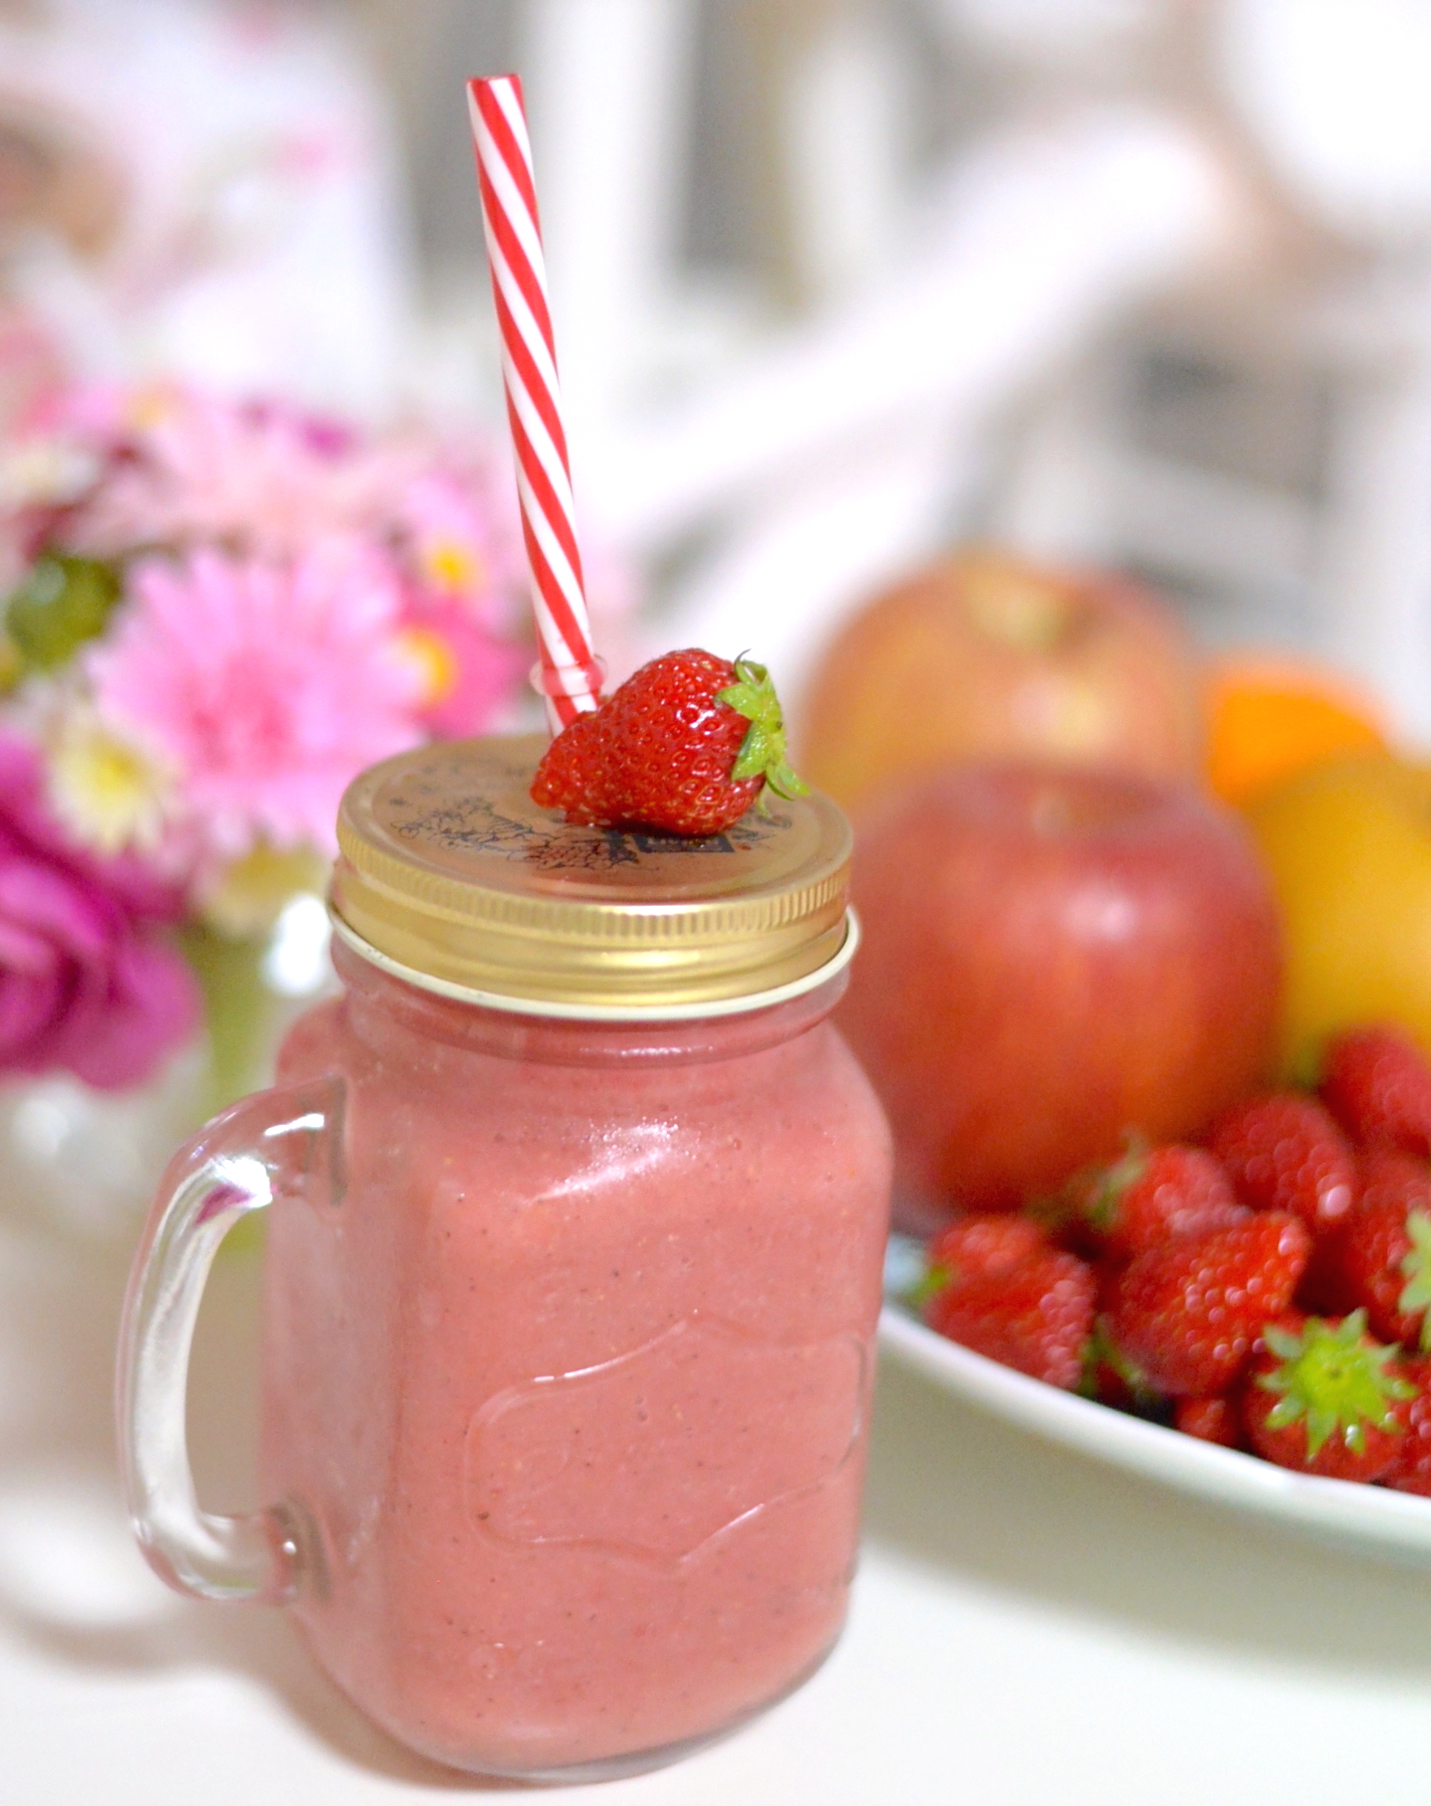 Fruitify your day! Mixed Fruit Smoothie Recipes